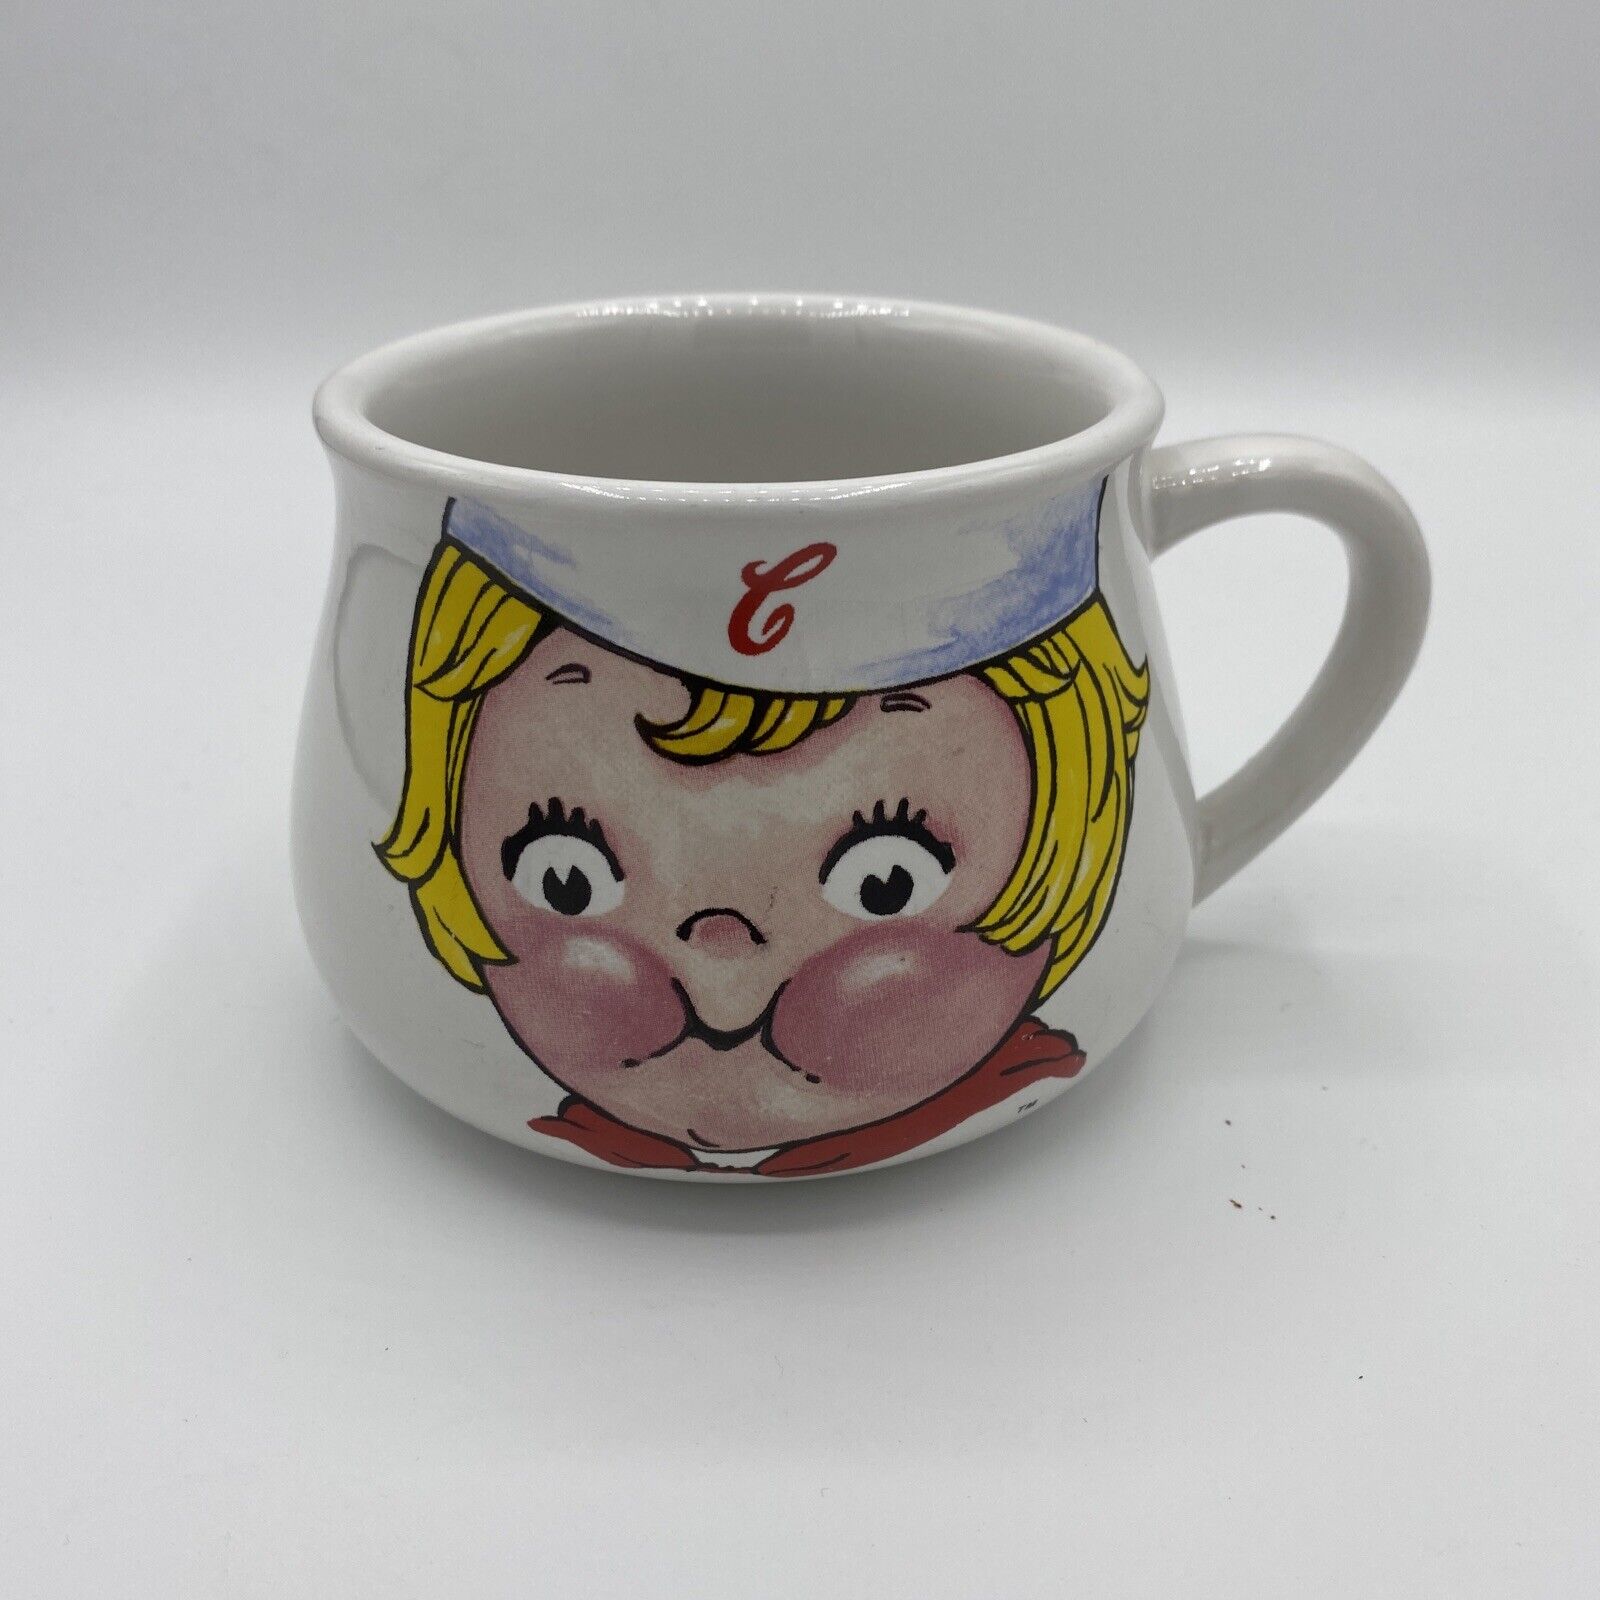 Vintage 1998 Campbell's Soup Face Coffee Mug, Cup Or Soup Bowl, Microwaveable